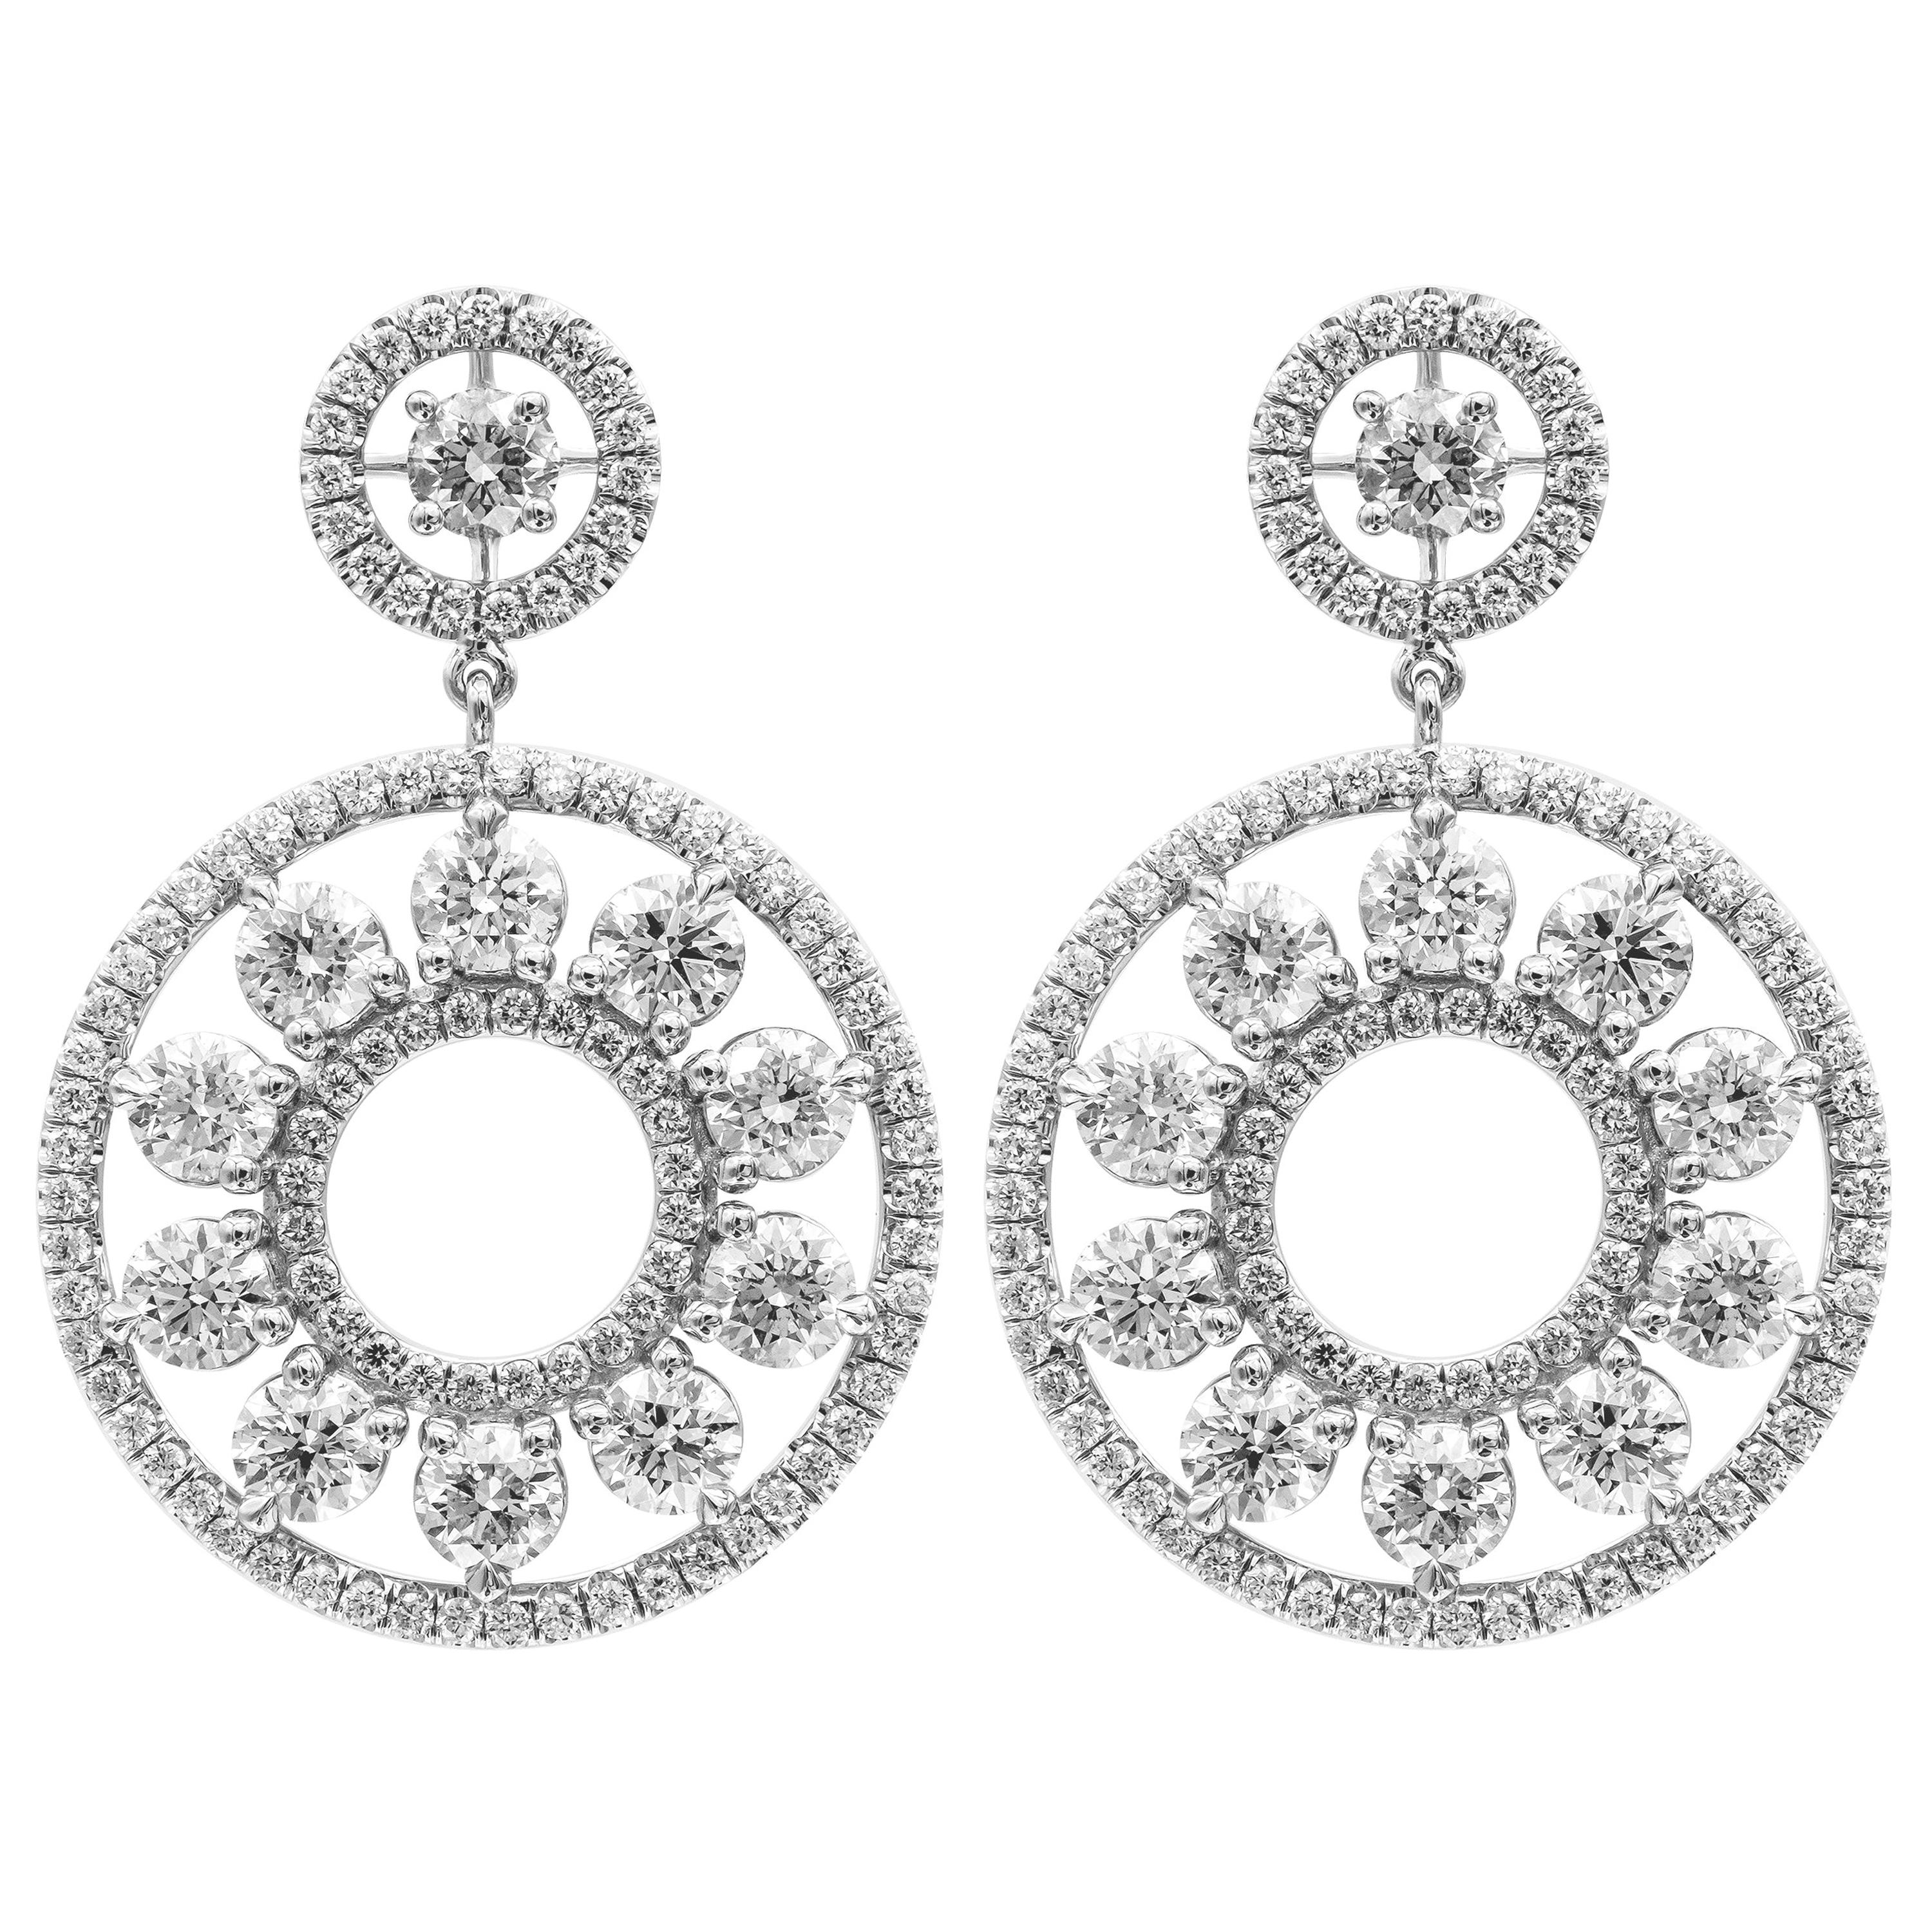 Earrings with Round Diamonds 6.58 Carat For Sale